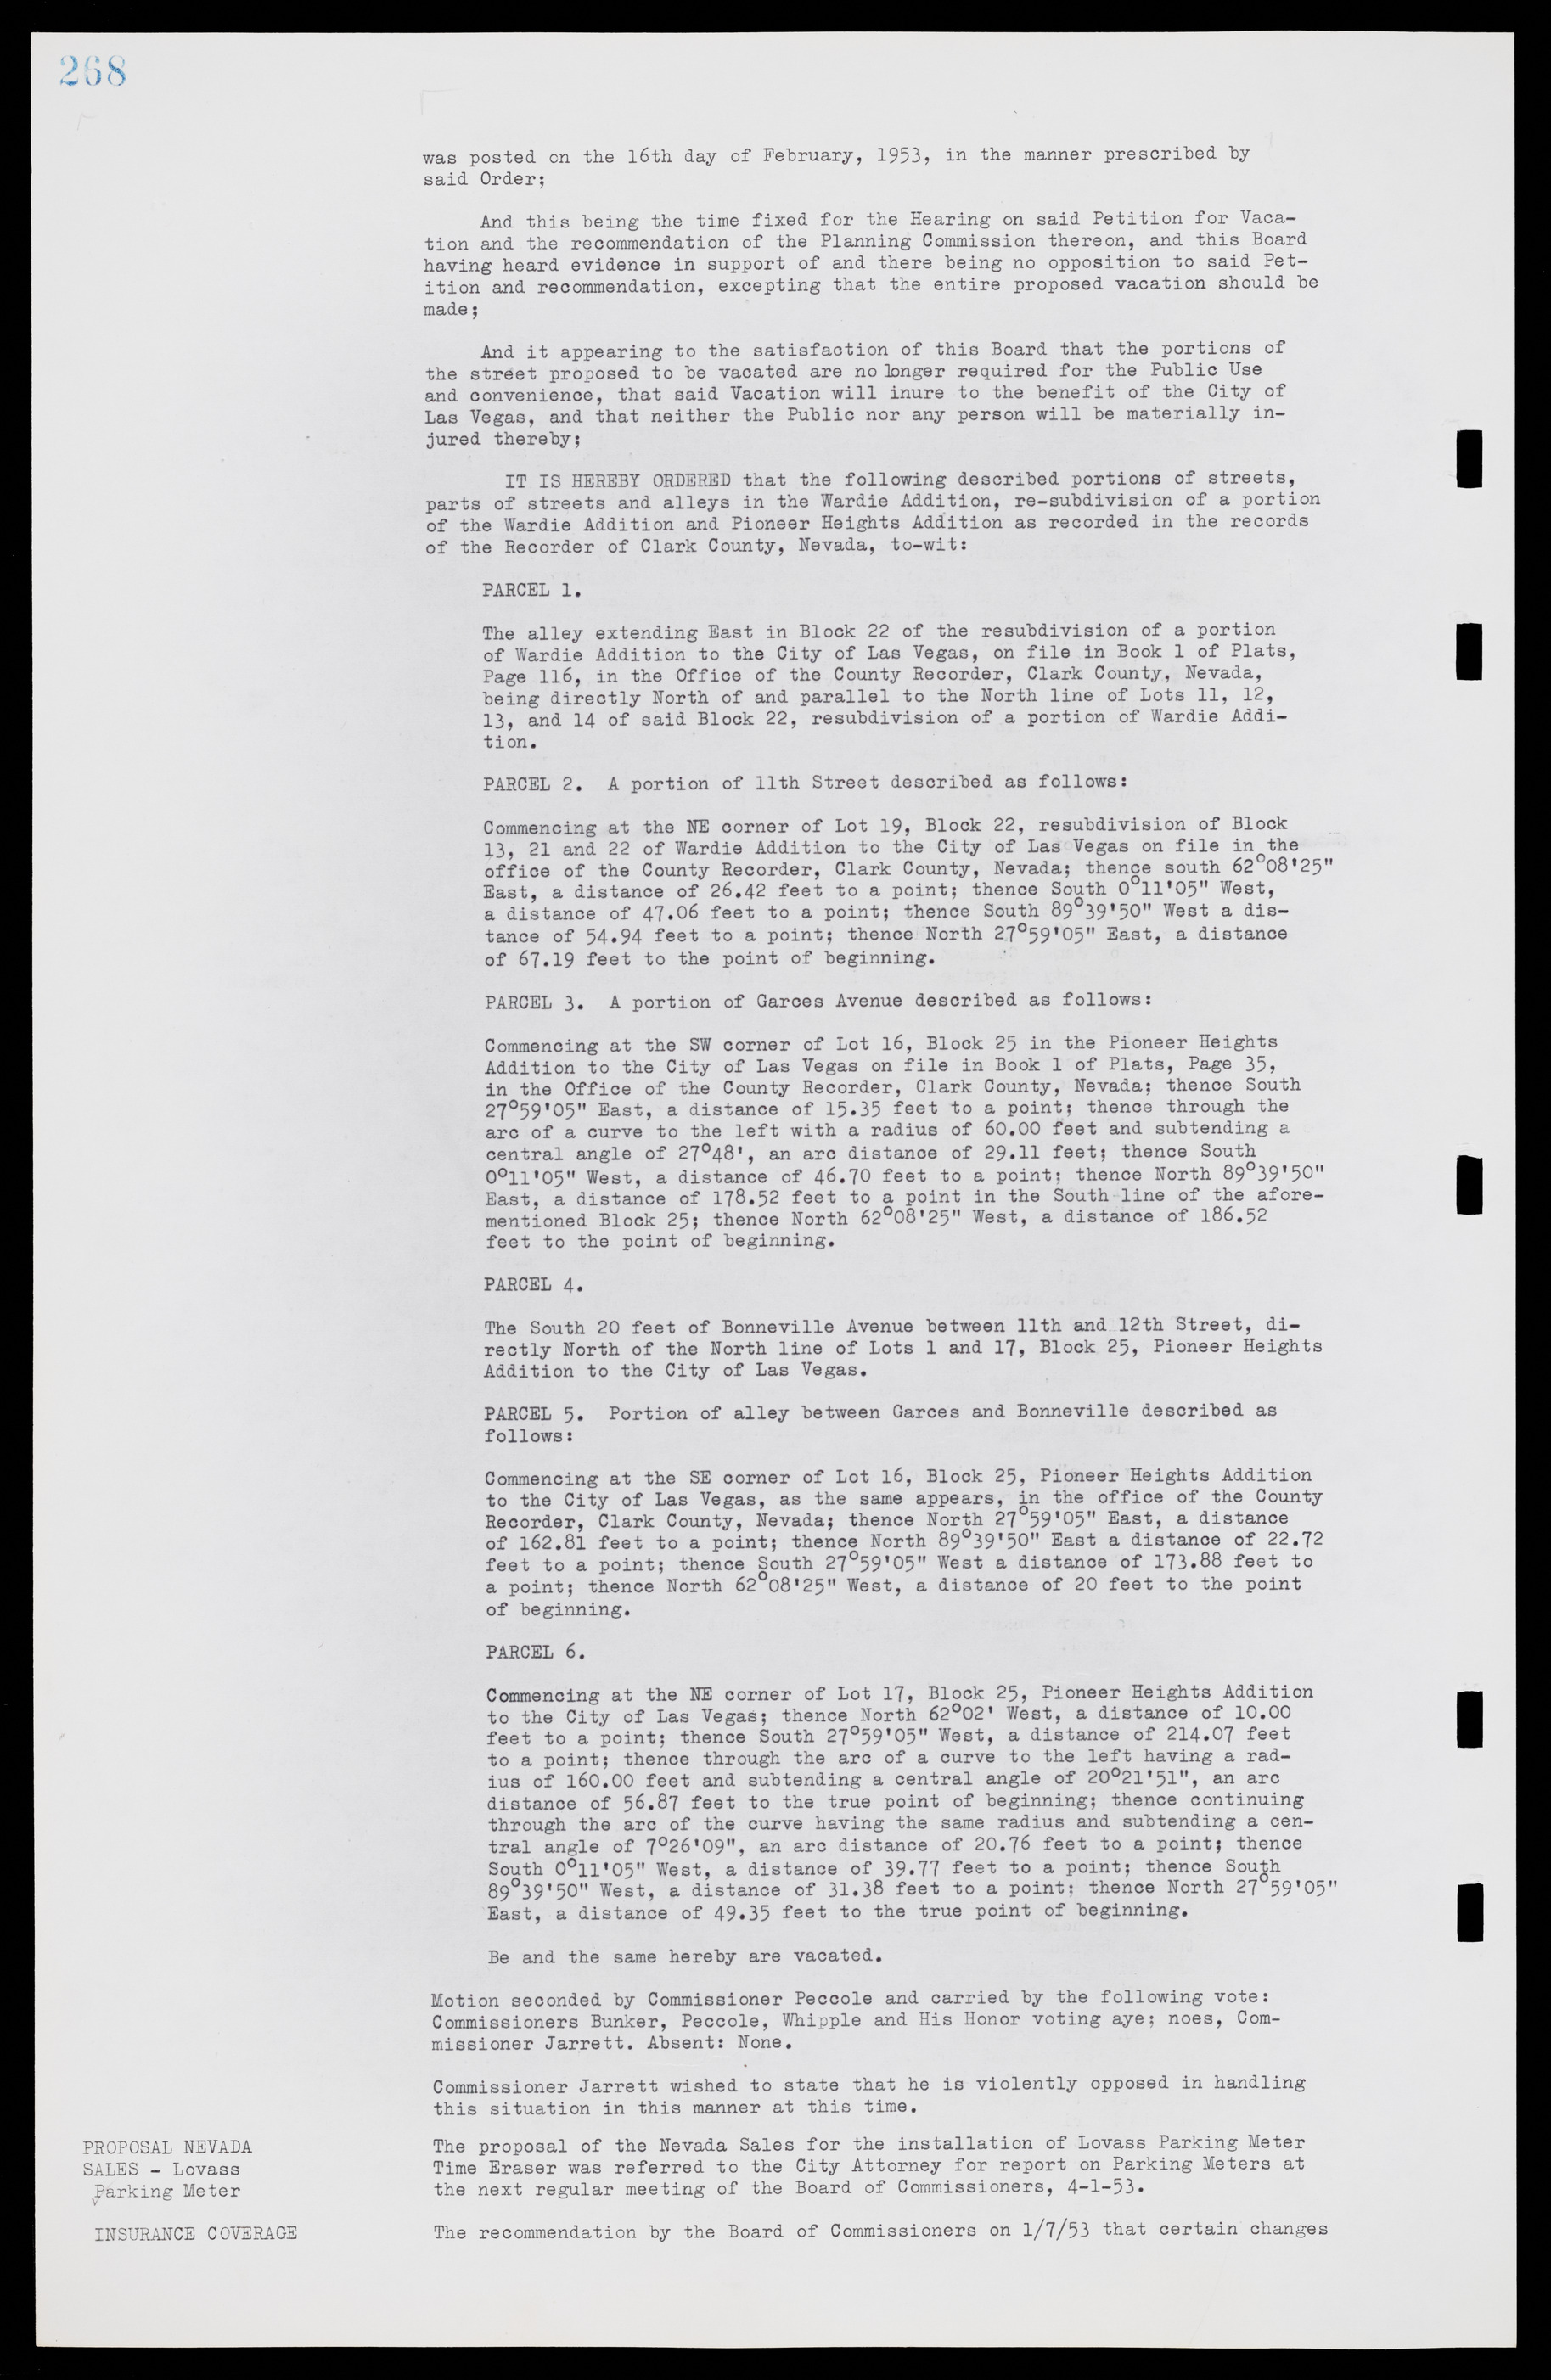 Las Vegas City Commission Minutes, May 26, 1952 to February 17, 1954, lvc000008-284